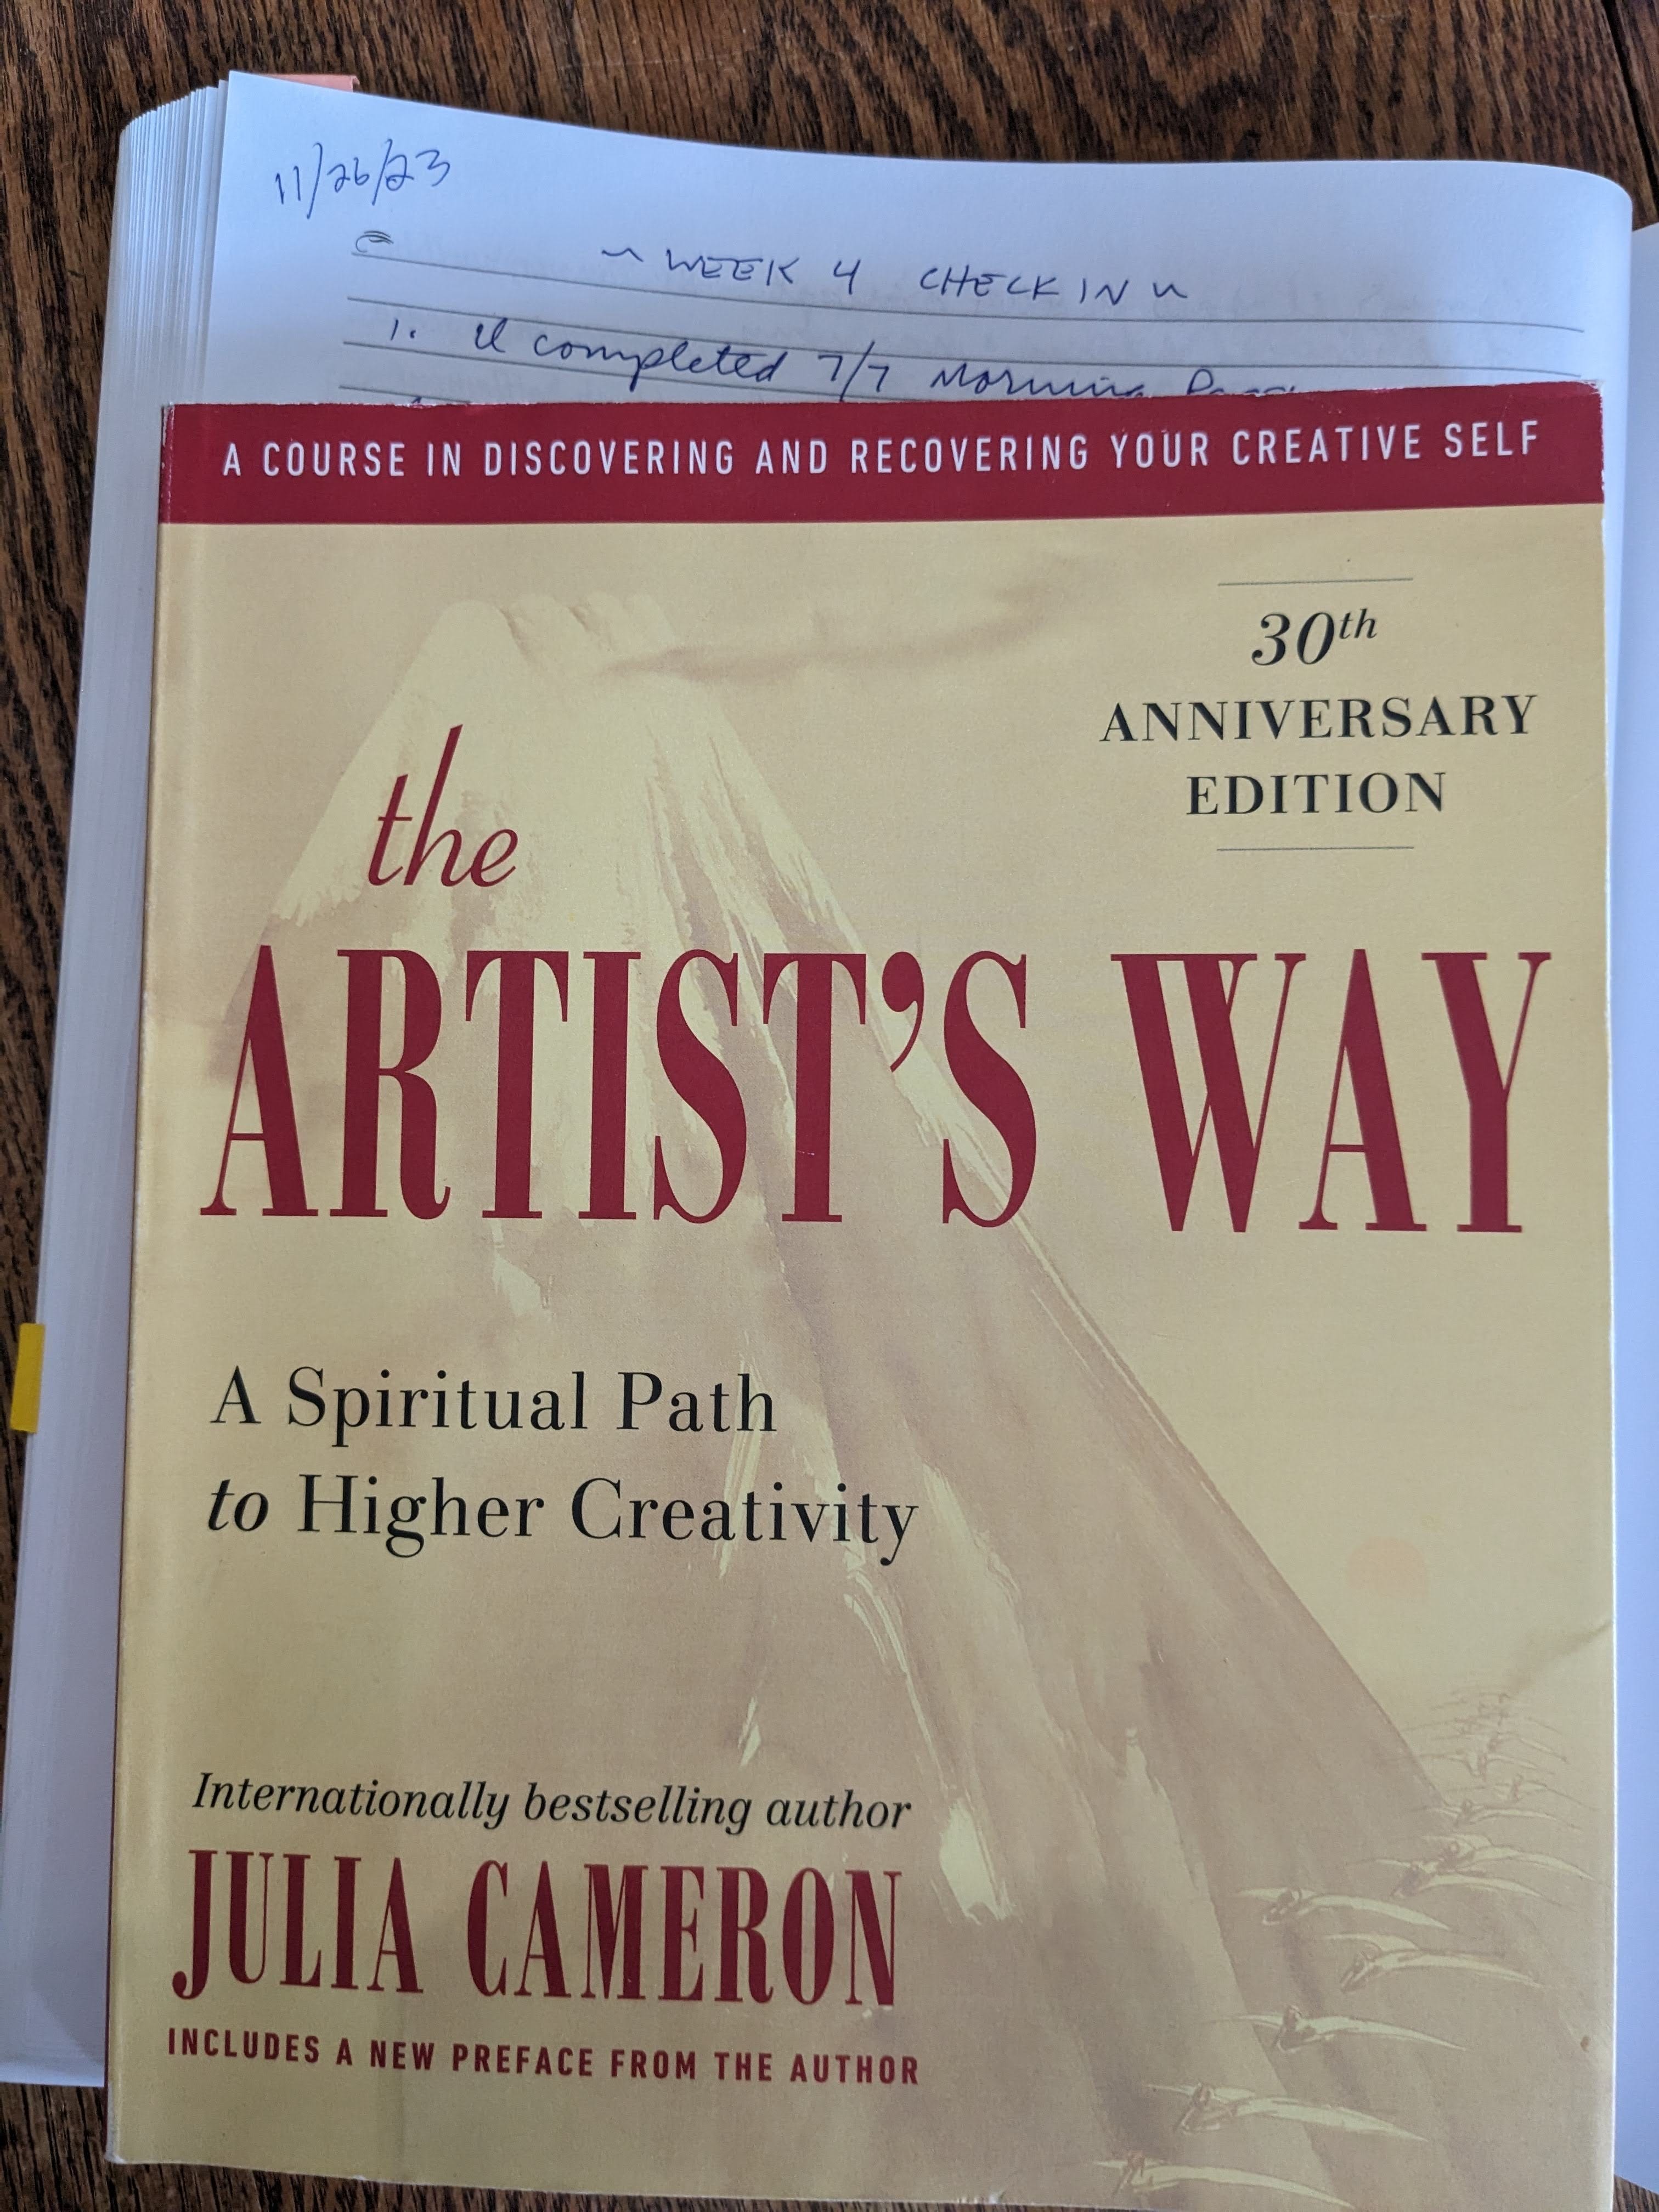 Julia Cameron Quote: “The Artist's Way is a spiritual journey, a